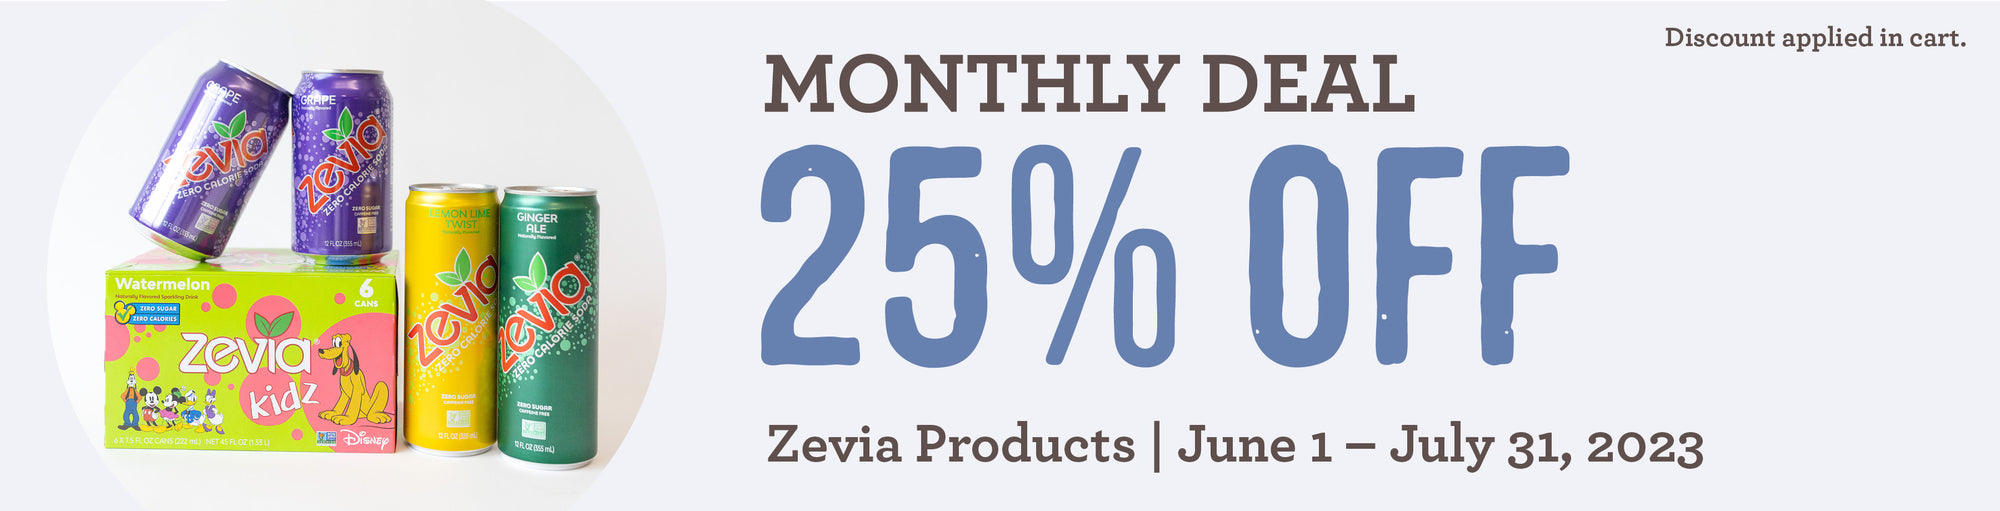 25% OFF Zevia products! June 1st through July 31st only!